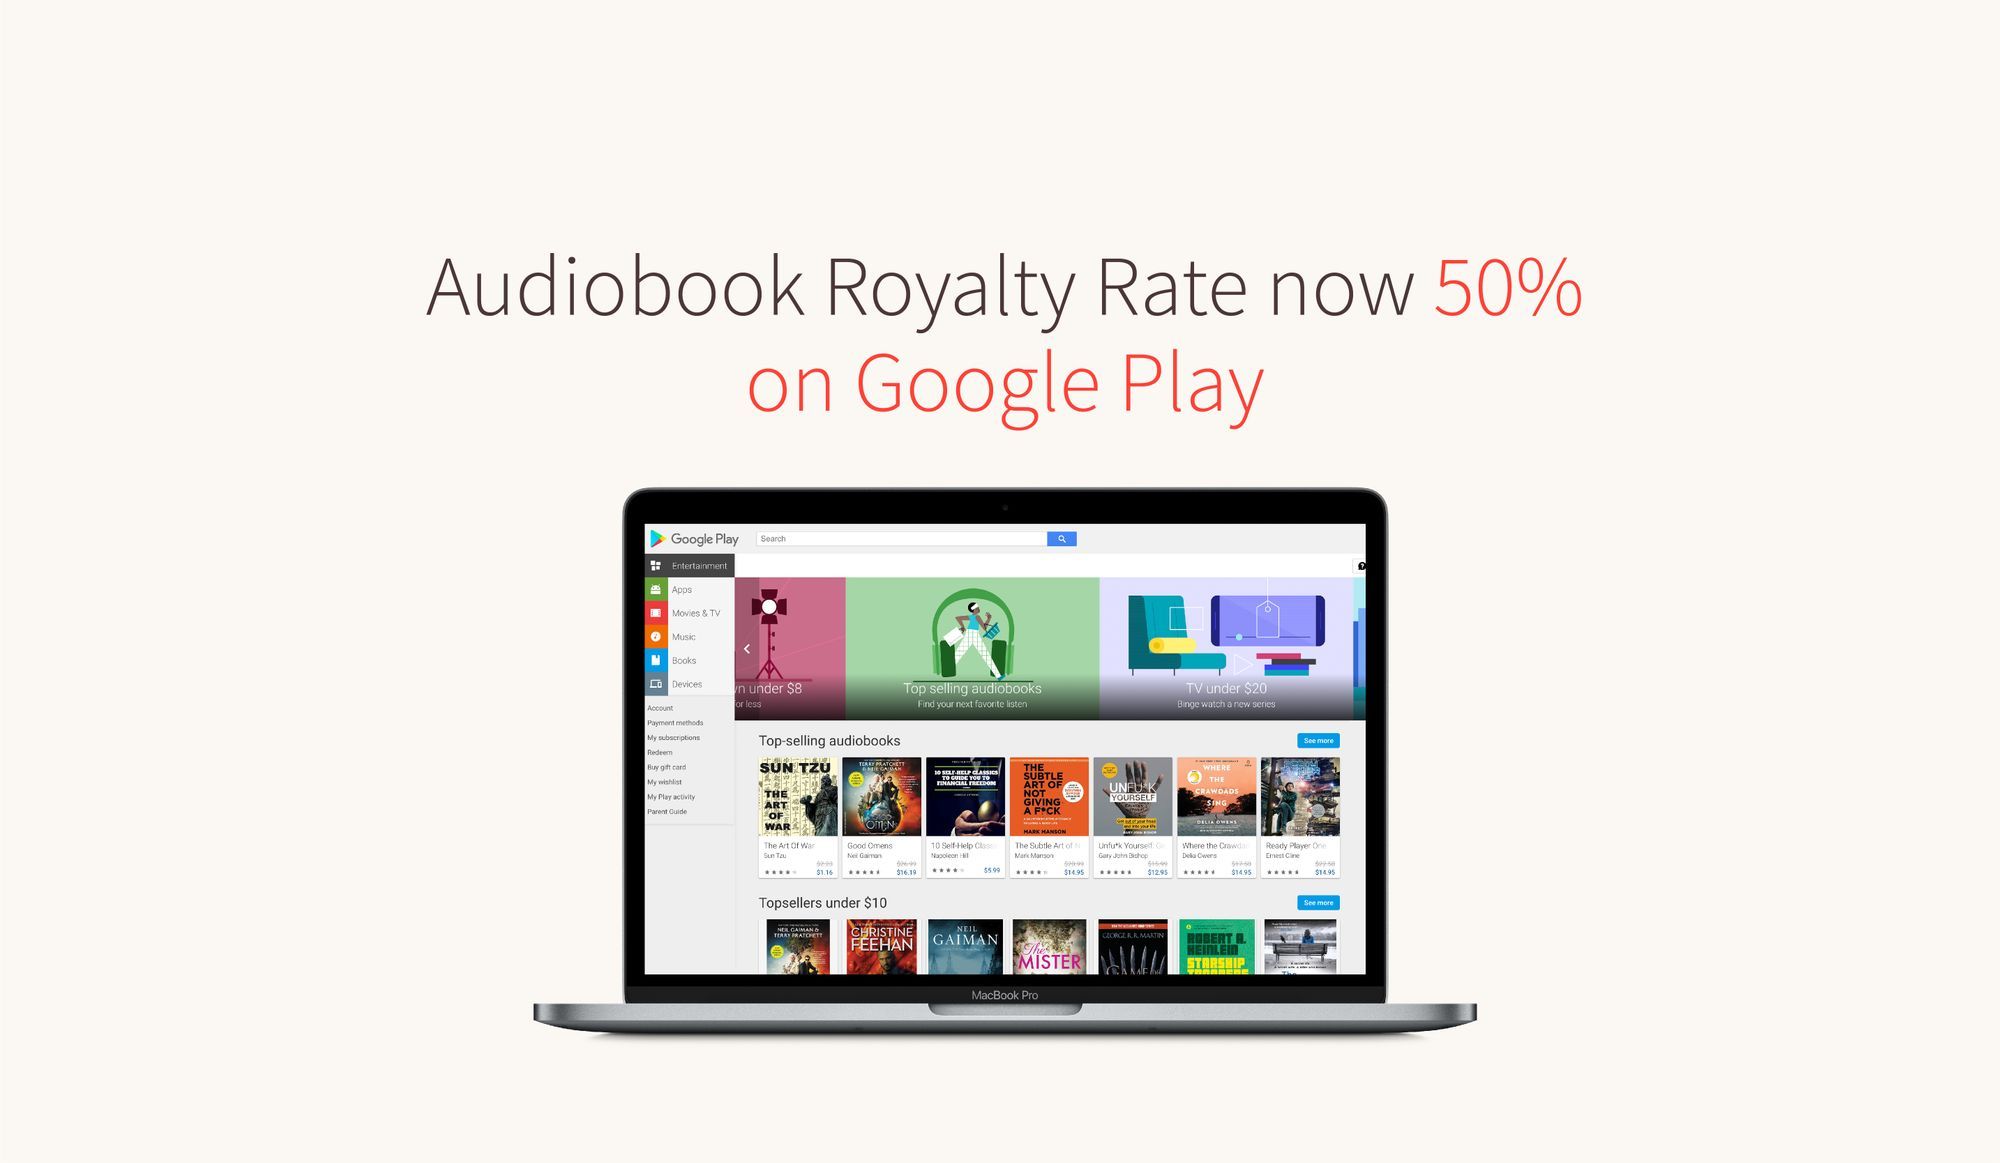 Another Google Play Royalty Rate Increase!